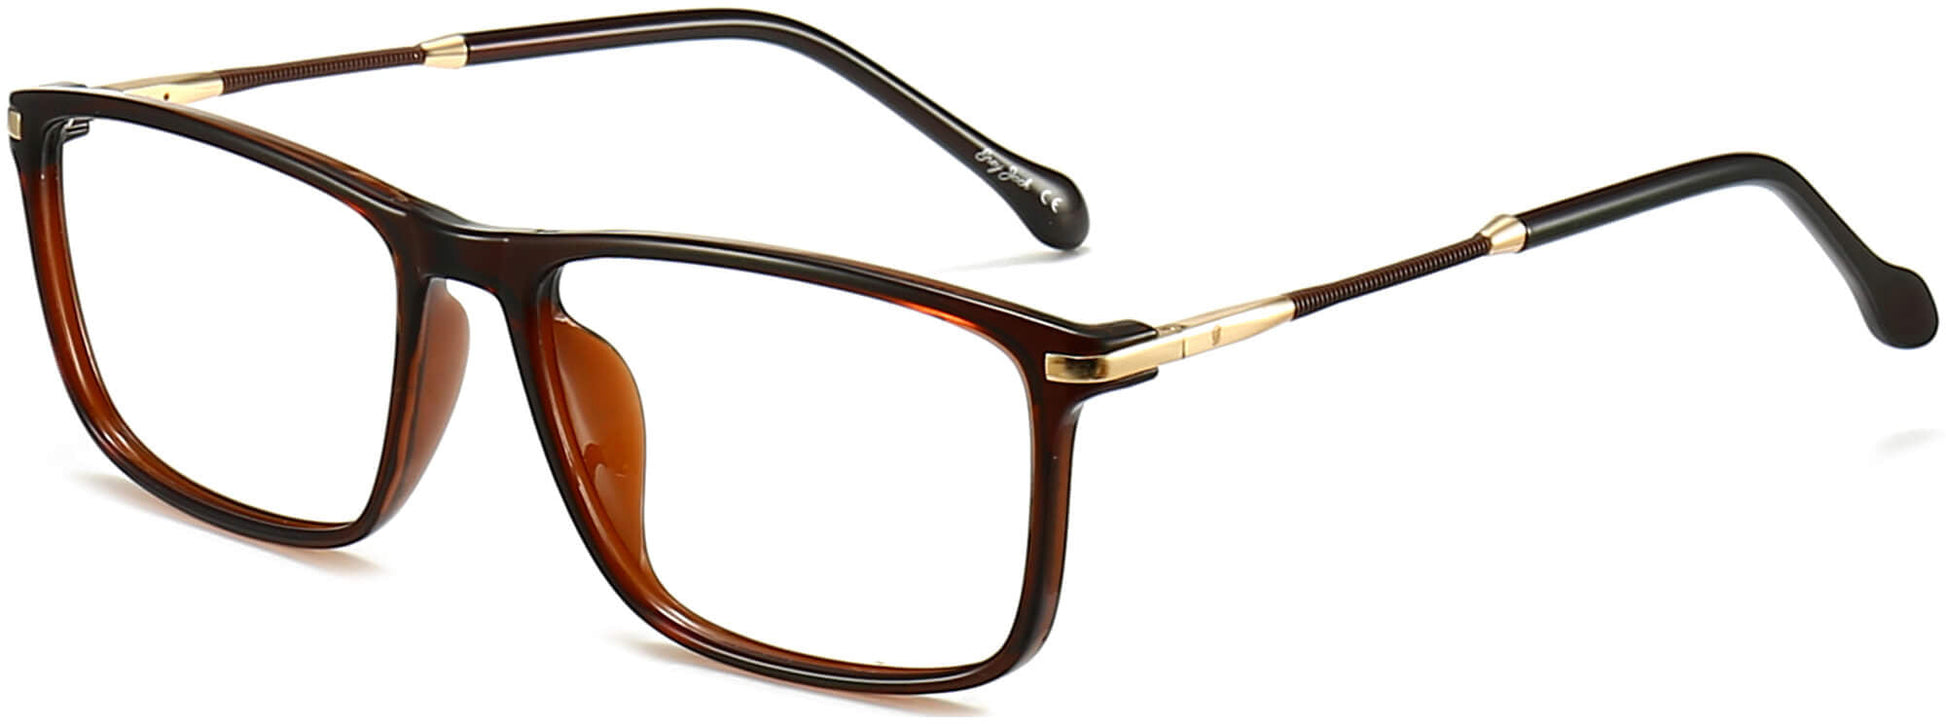 Sincere Square Brown Eyeglasses from ANRRI, angle view